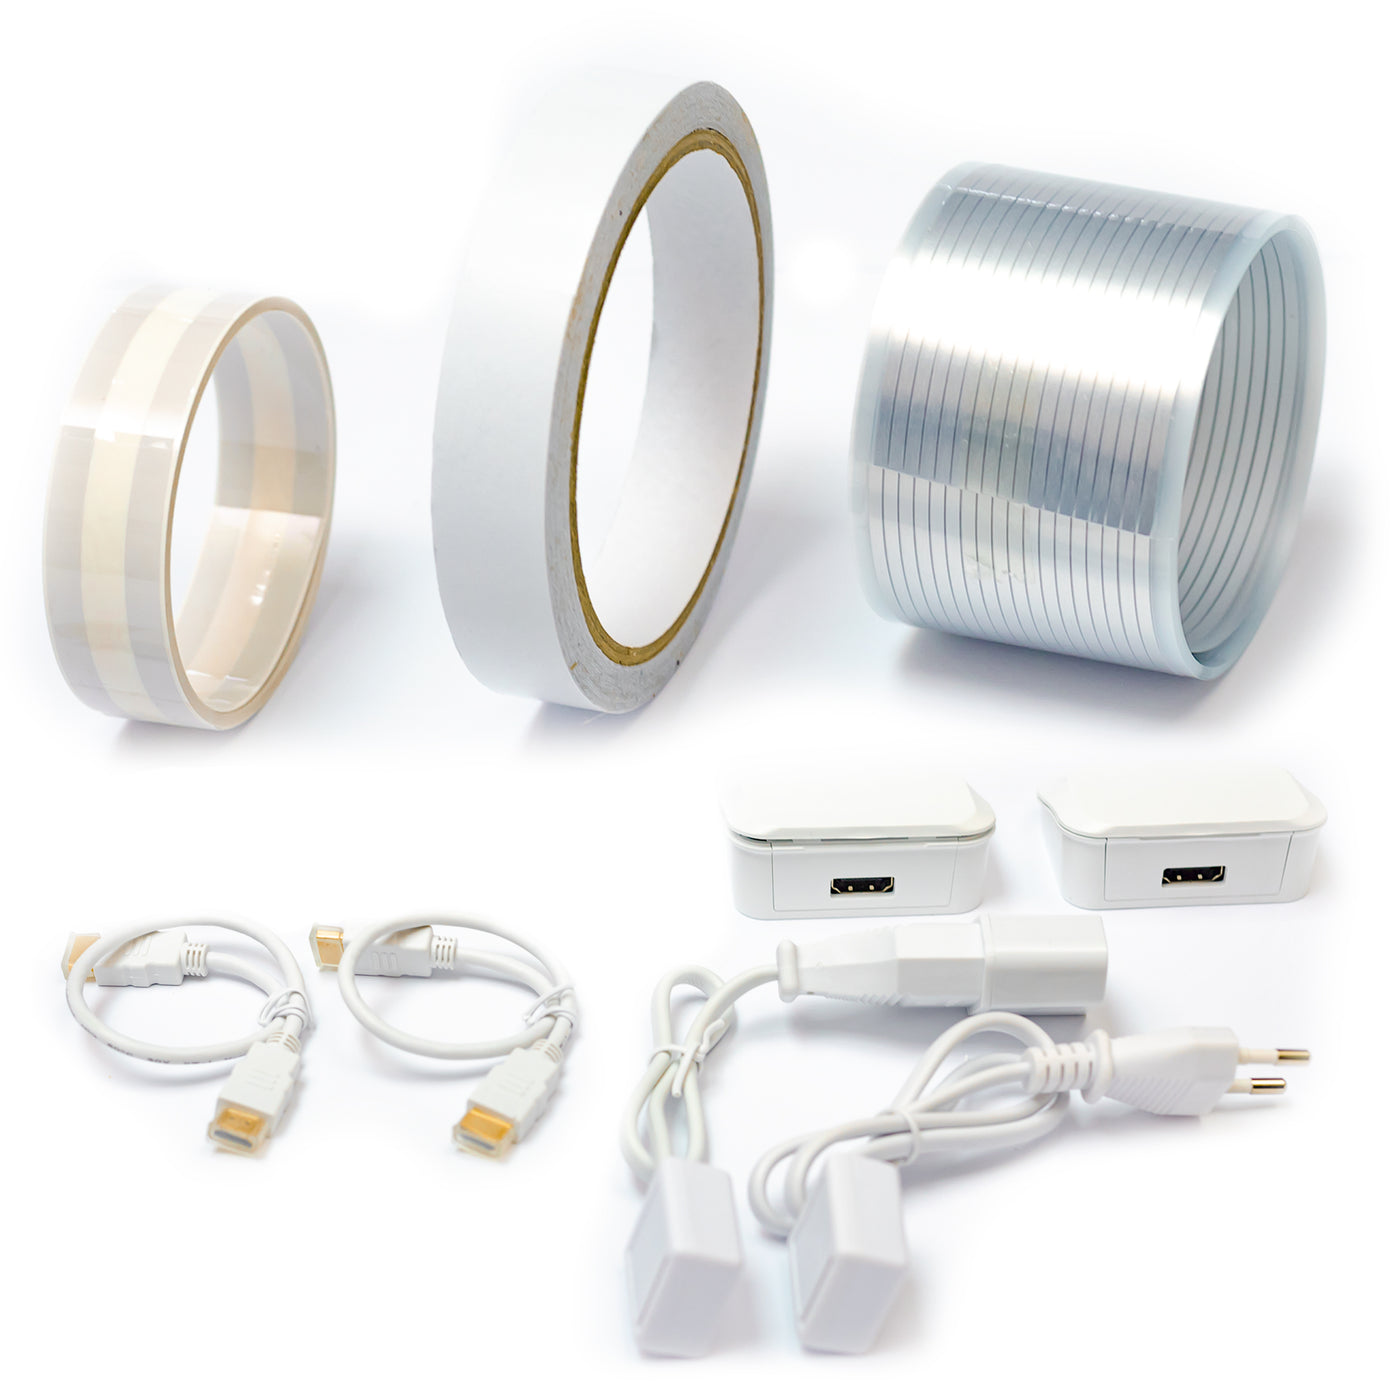 HOMEPROTEK Cable trunking kit for wall, ceiling and floor